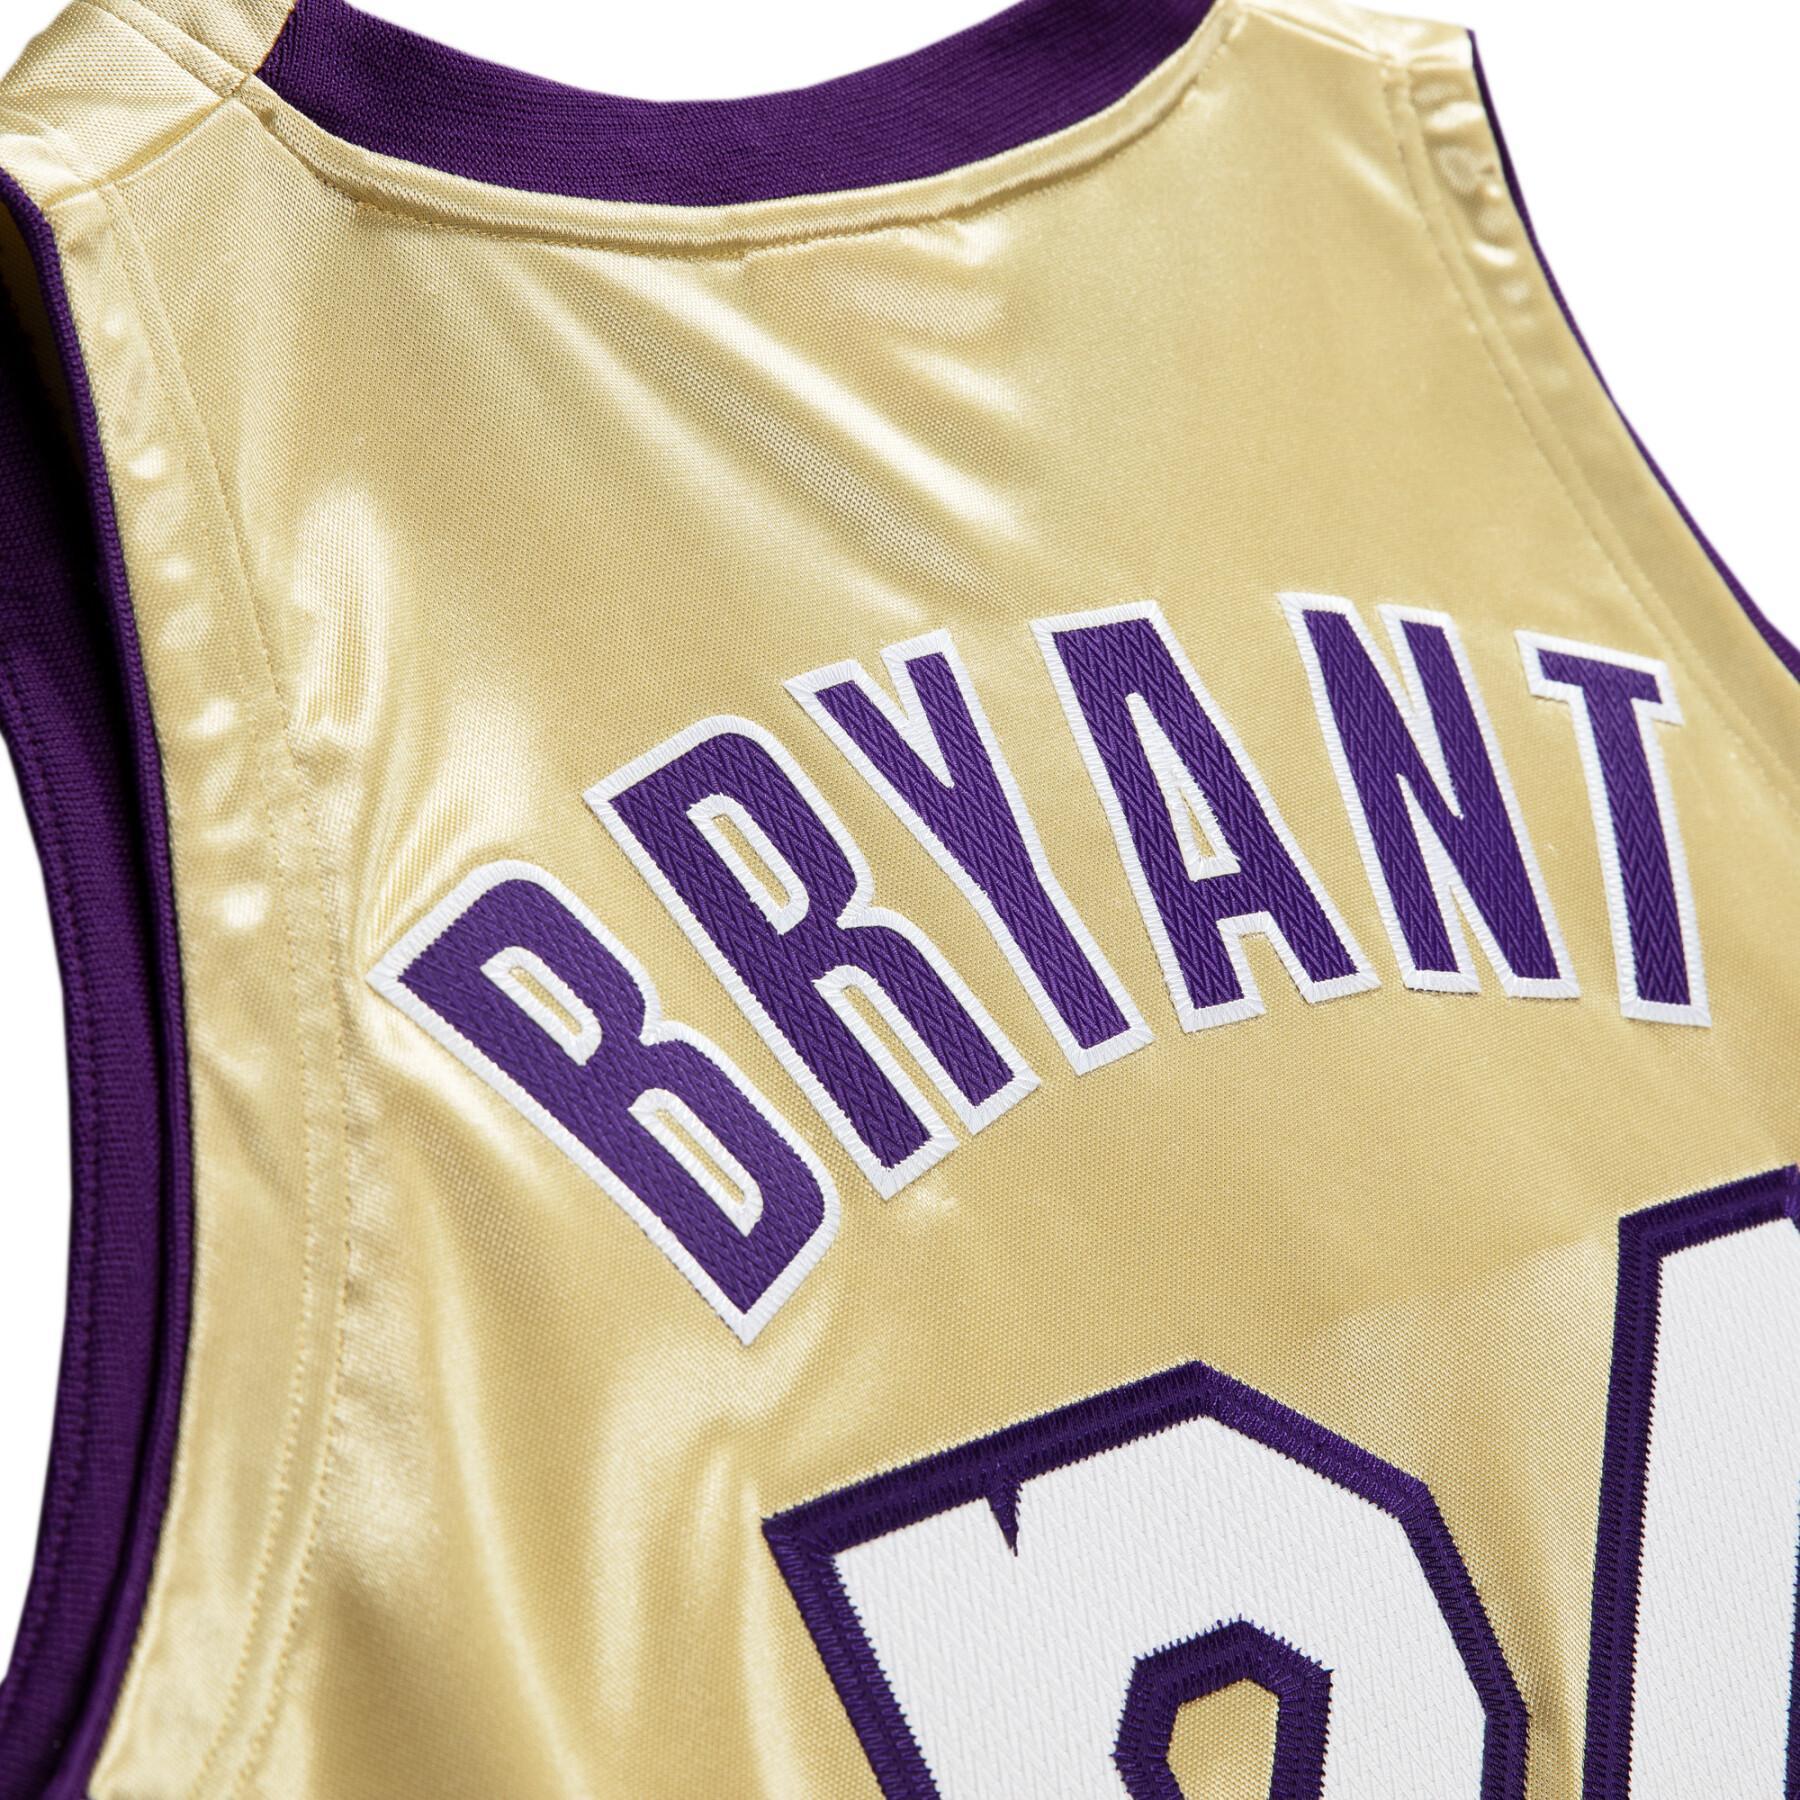 Jersey Los Angeles Lakers NBA Authentic 96 Kobe Bryant